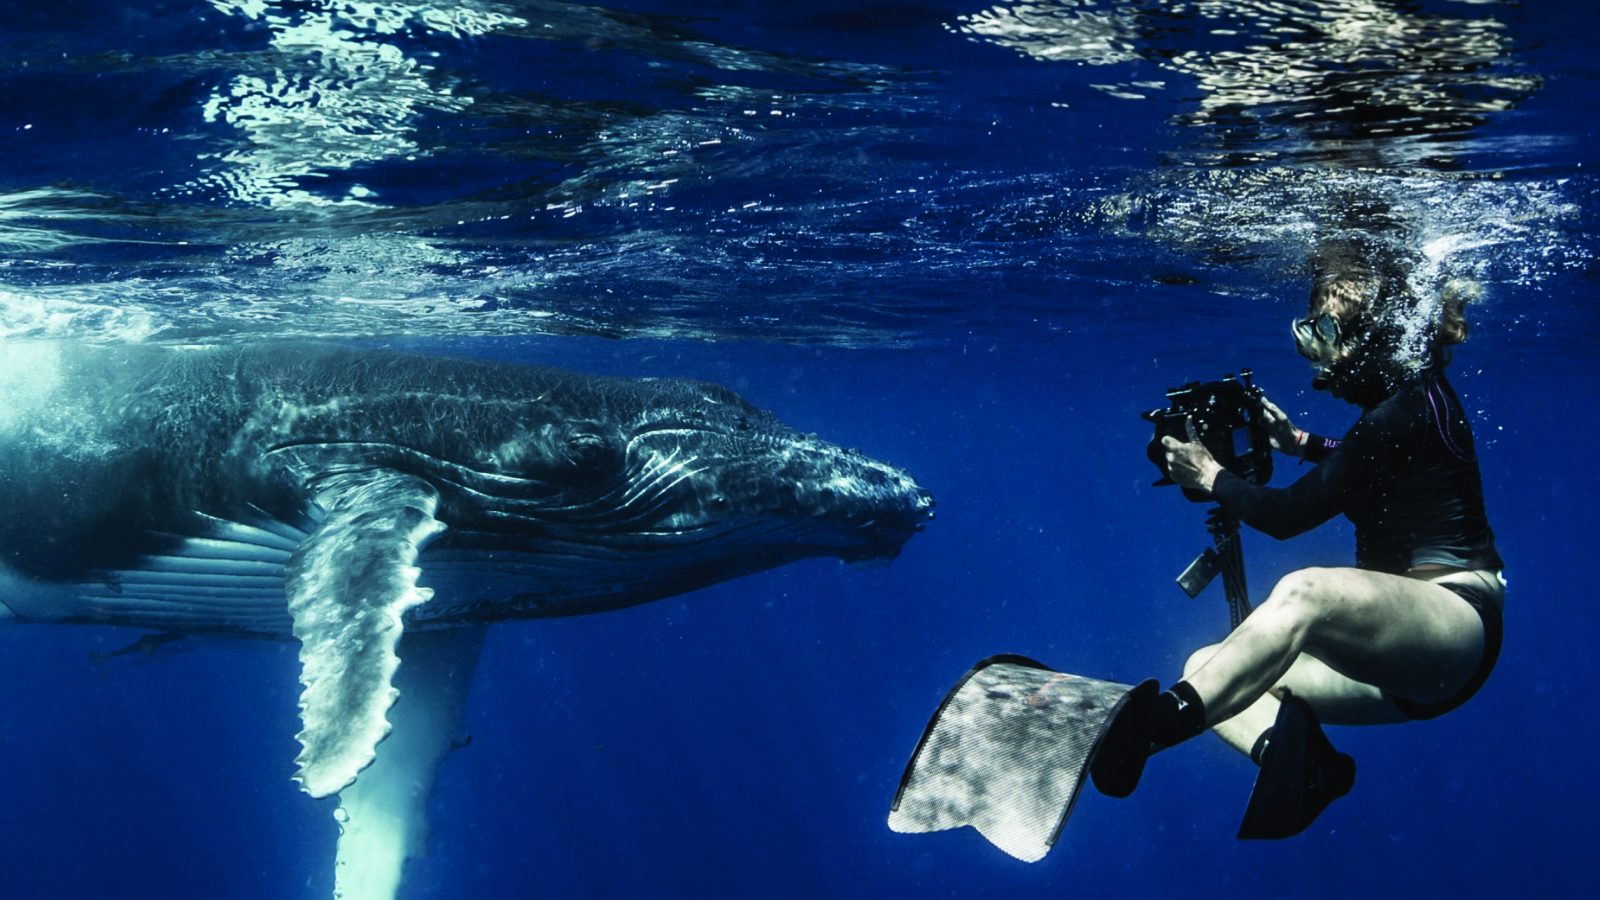 Annie Crawley pictured playful baby humpback whale